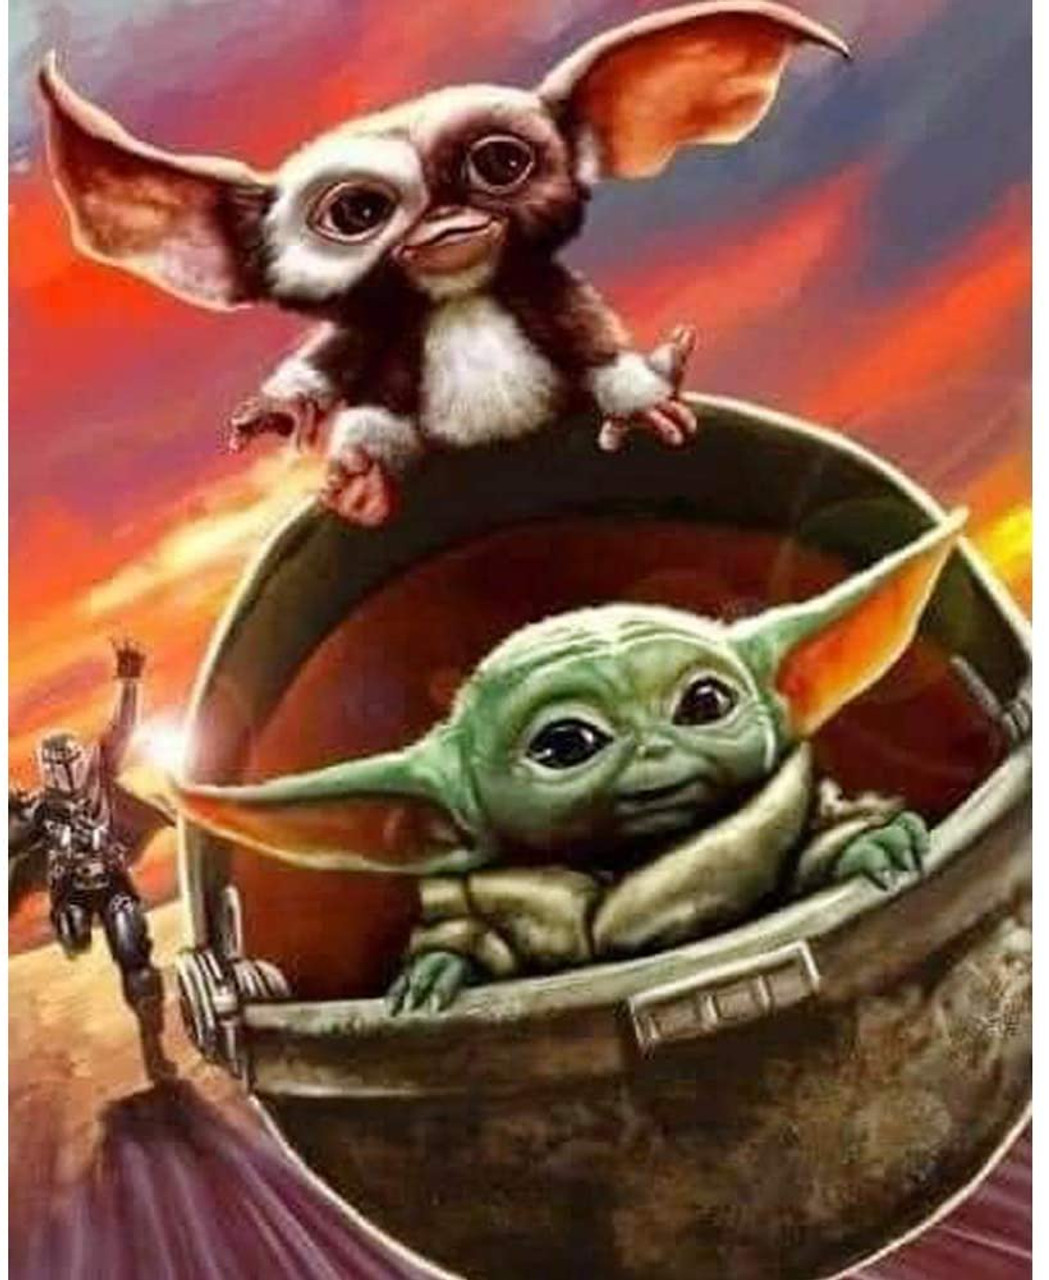 https://cdn11.bigcommerce.com/s-xf1j2e32mt/images/stencil/1280x1280/products/1066/507/5d-diamond-painting-baby-yoda-and-gizmo-kit-30153881944247__39290.1630509814.jpg?c=1